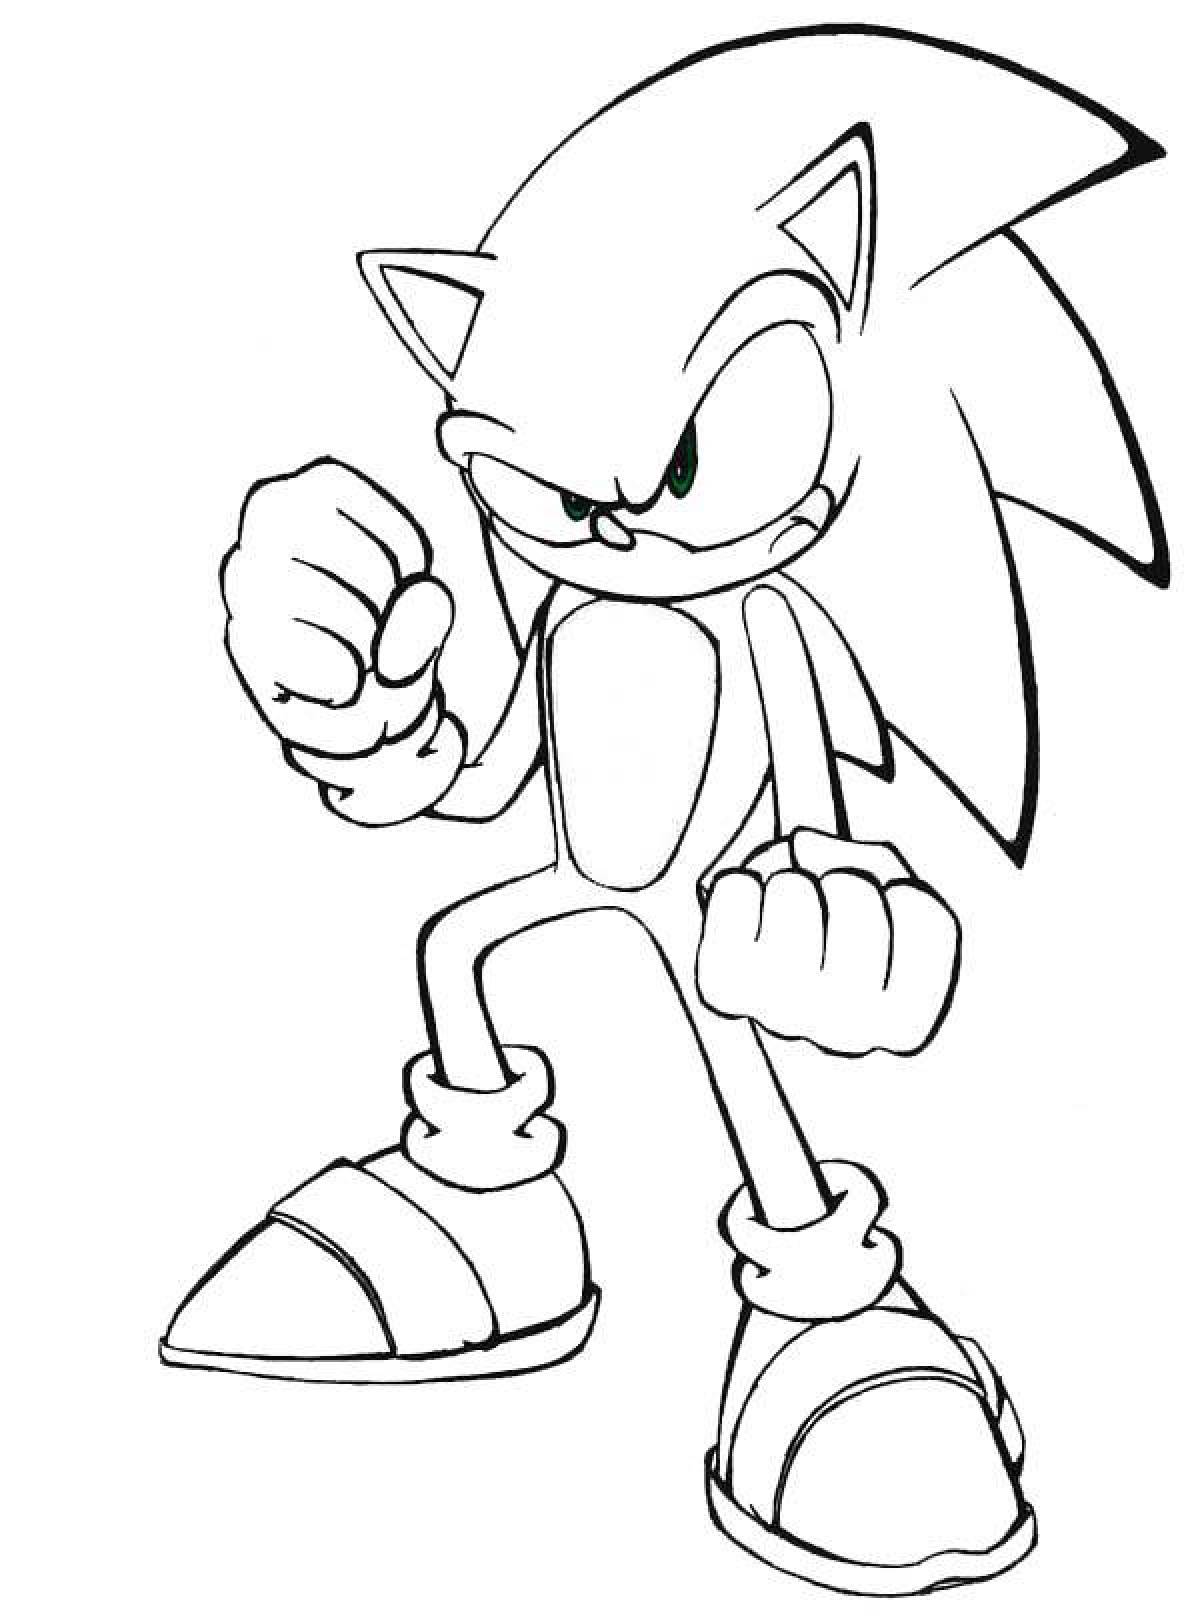 Awesome sonic exe coloring book